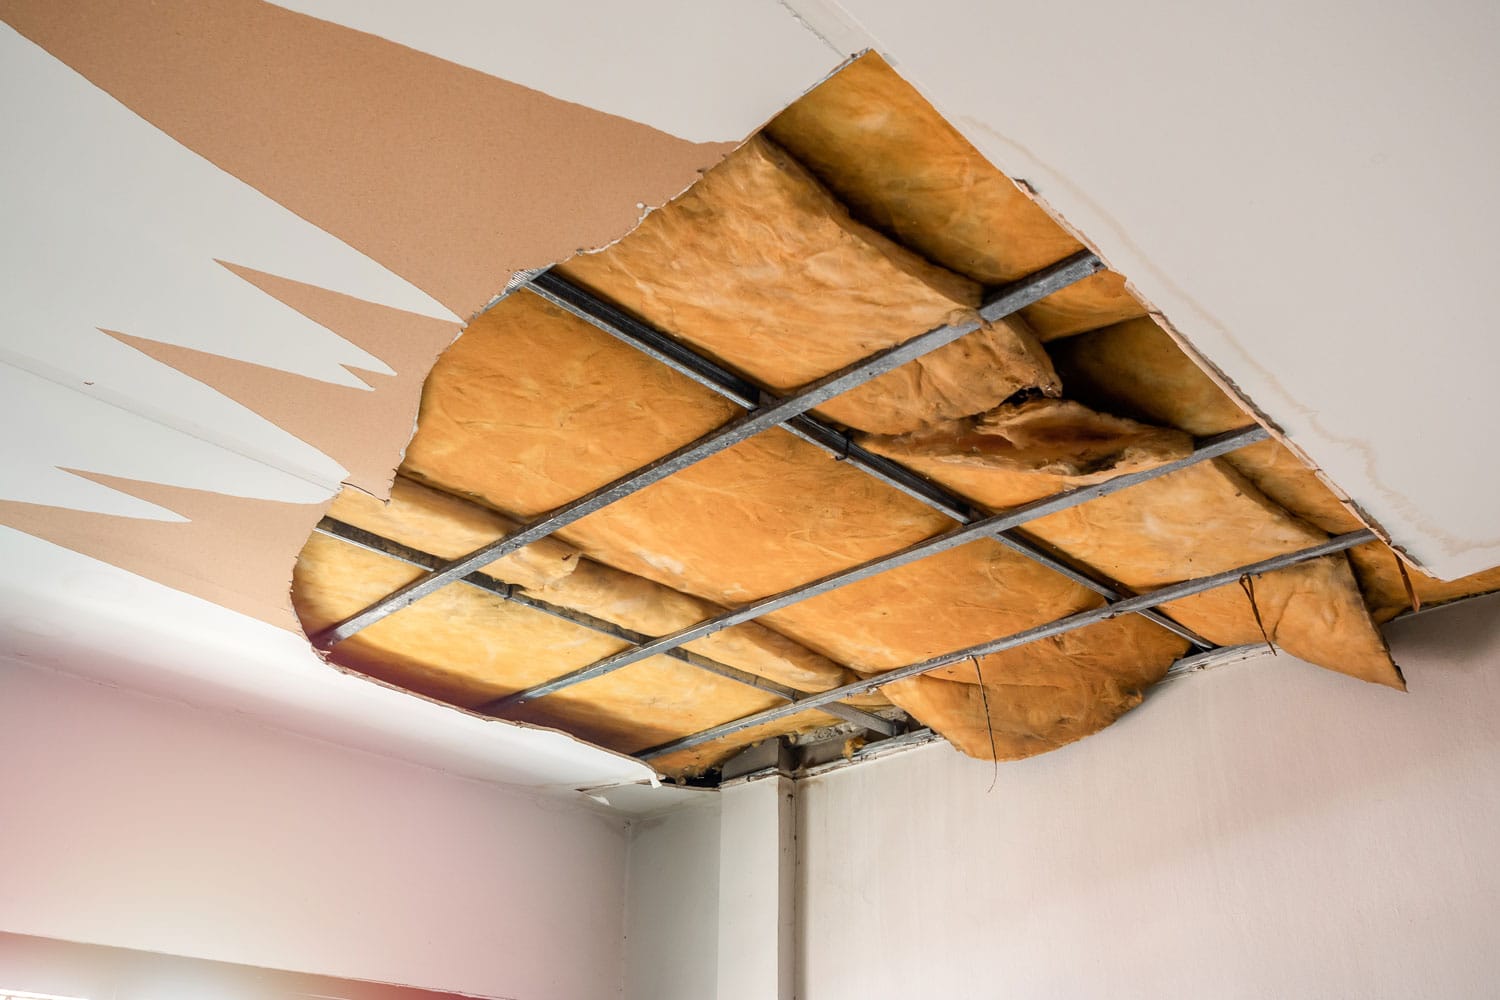 Damage ceiling showing the thermal insulation in the ceiling